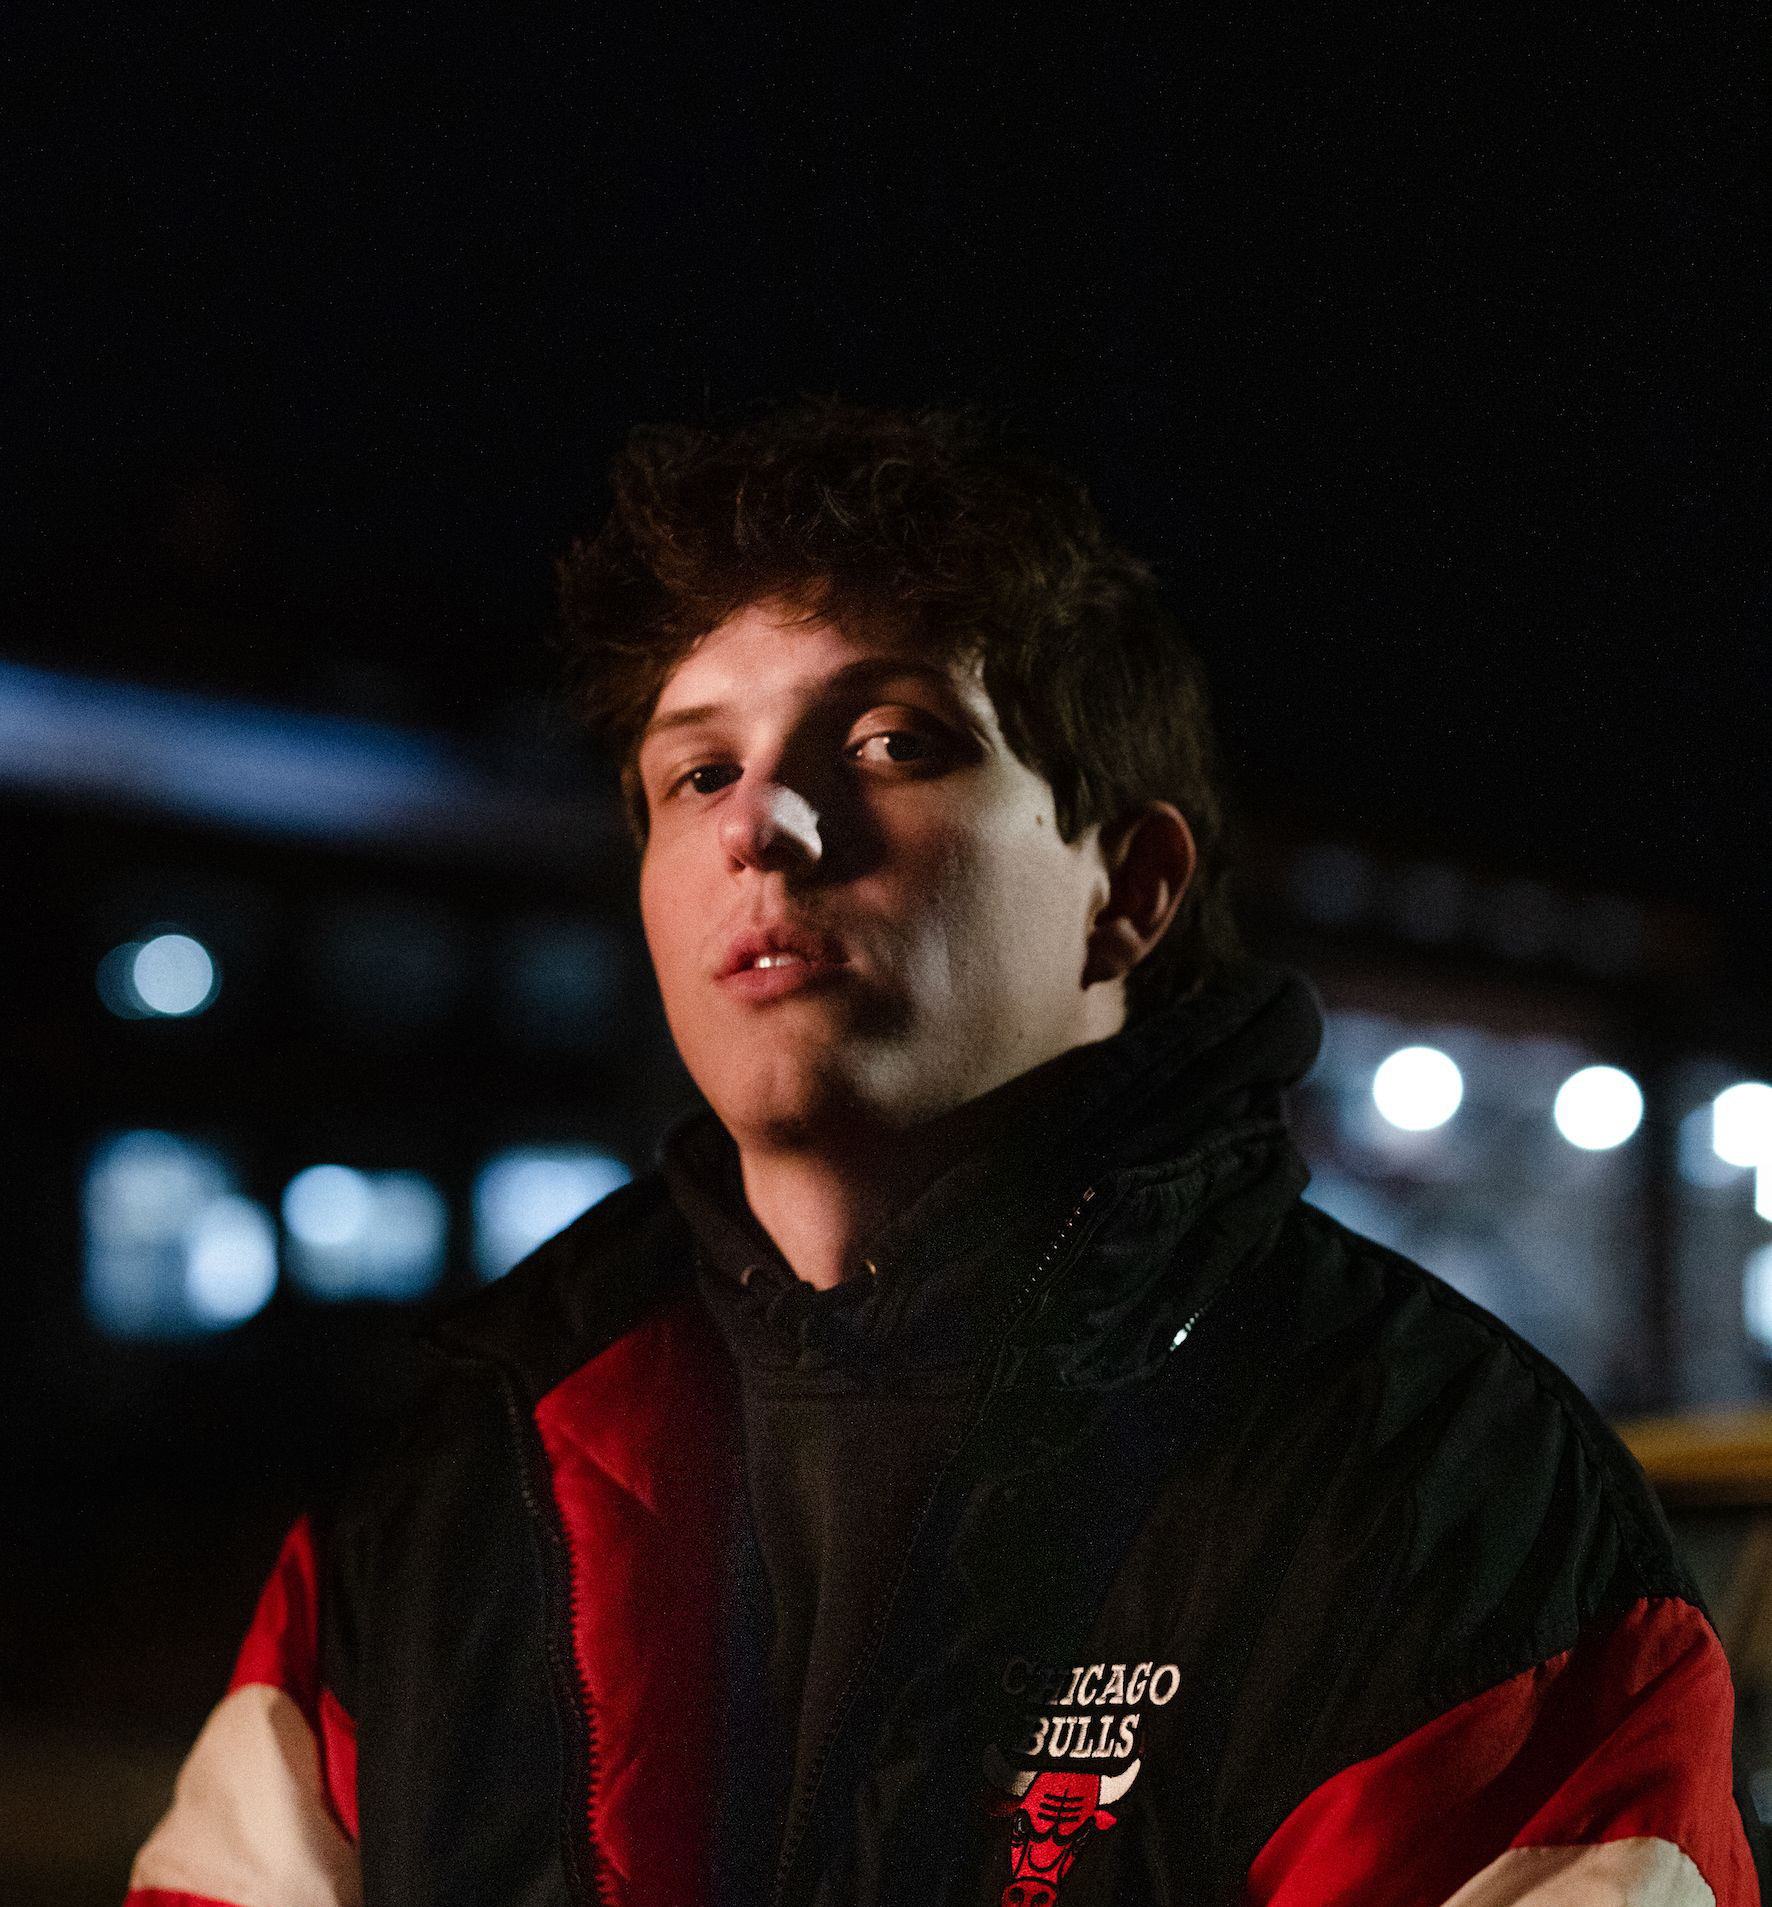 BOY IN SPACE shares his debut EP ‘Frontyard’ featuring new single ‘Sucker Punch’ 